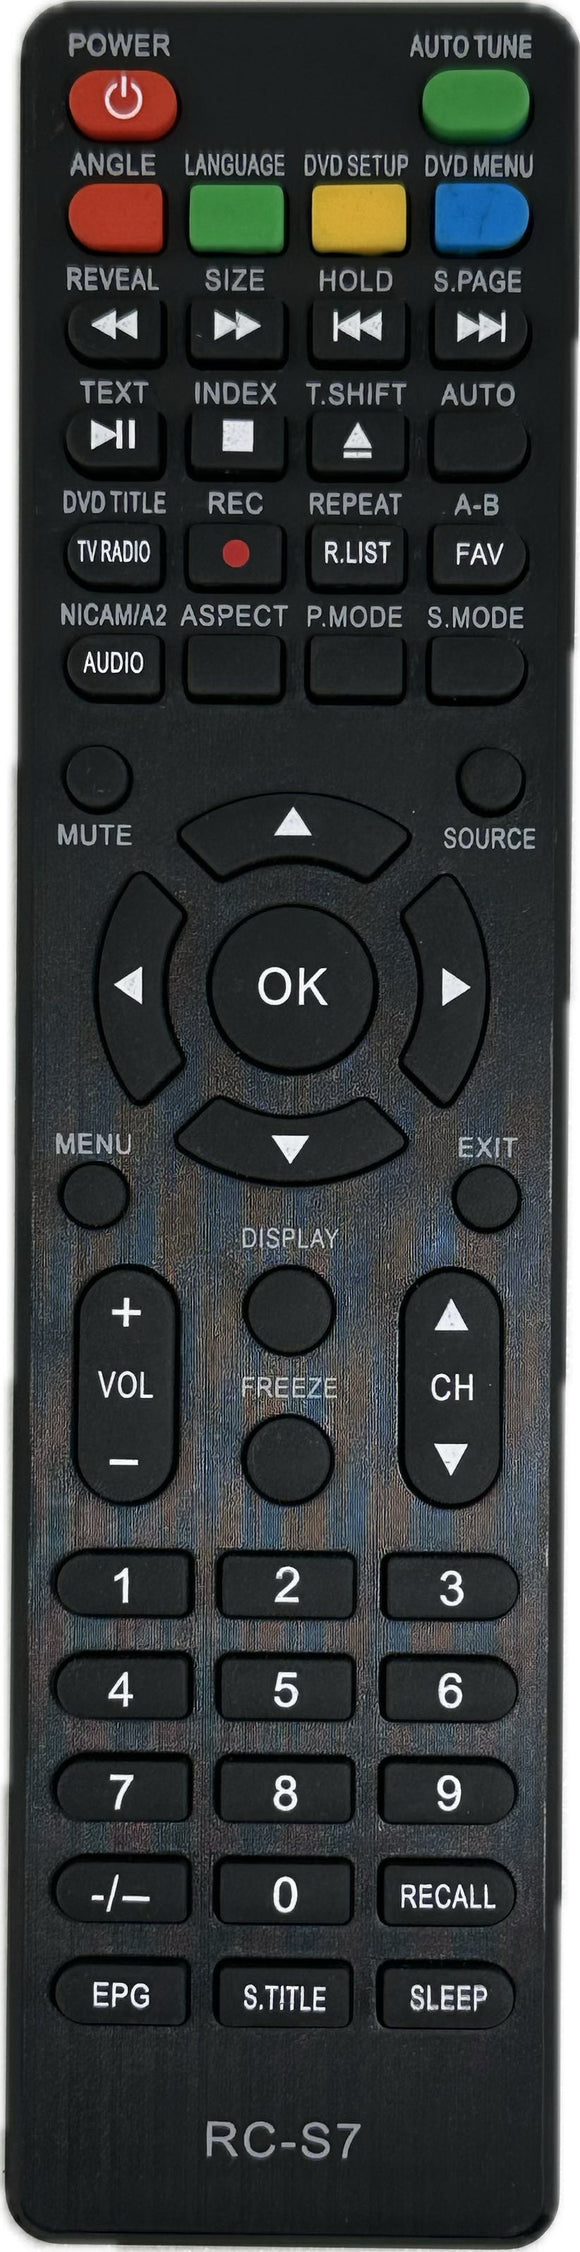 Sphere S7LED235 TV Replacement Remote Control